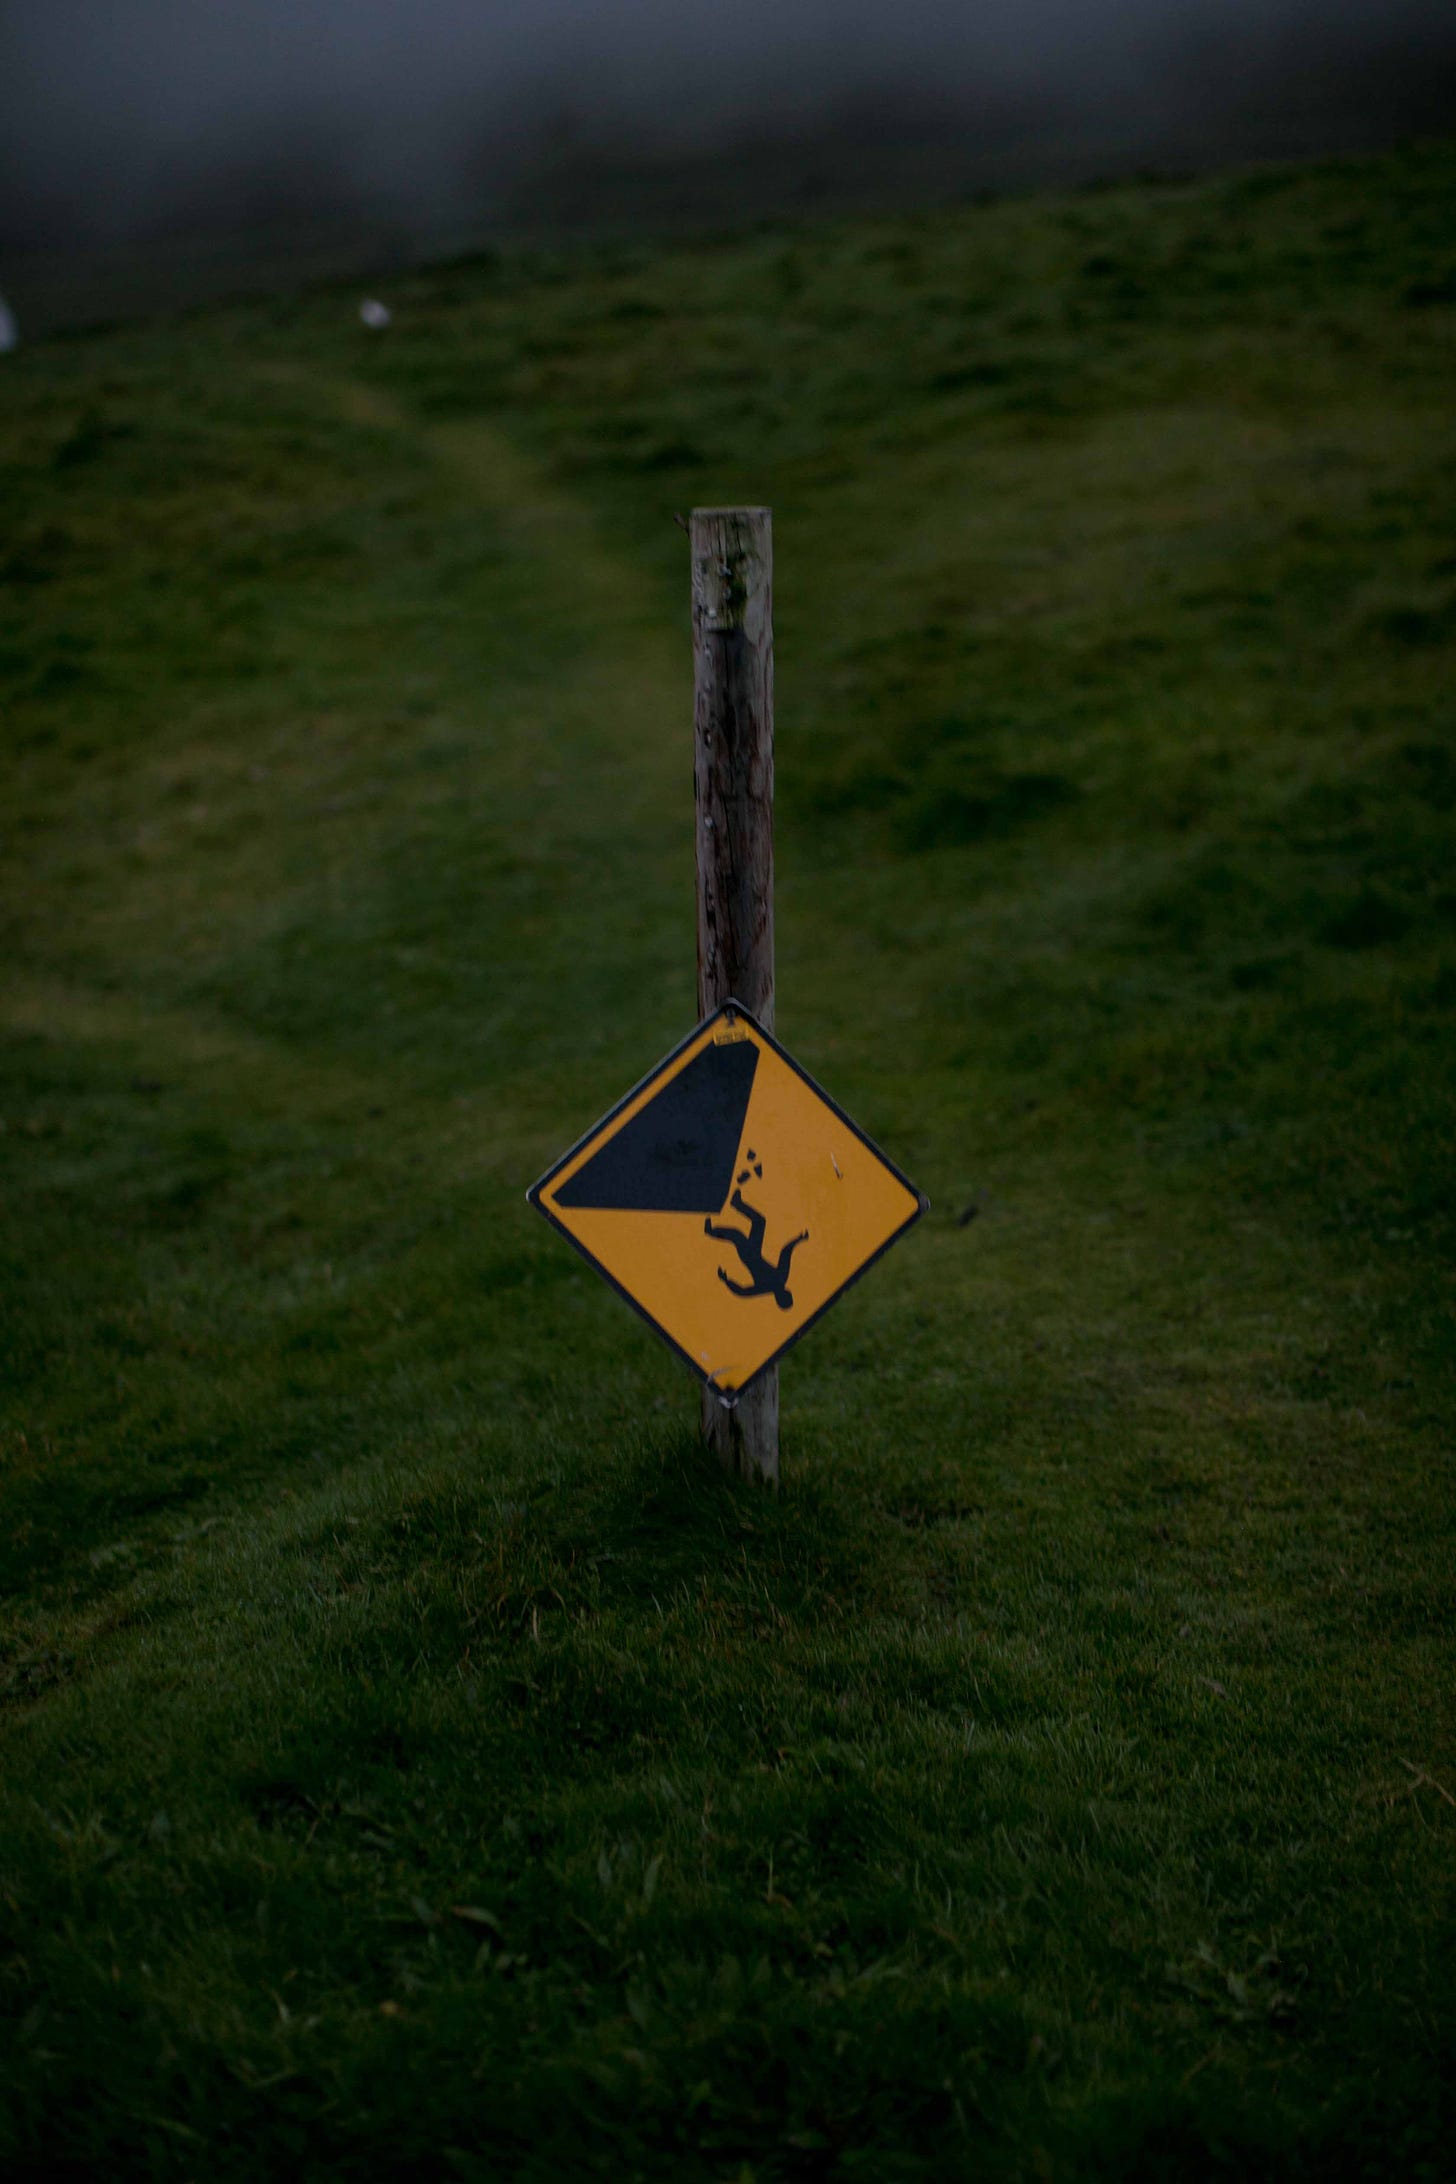 Sign of a body falling has turned upside down itself on Great Blasket Island, Ireland. Photographed in September 2020 when the planet was in its own great imbalance.